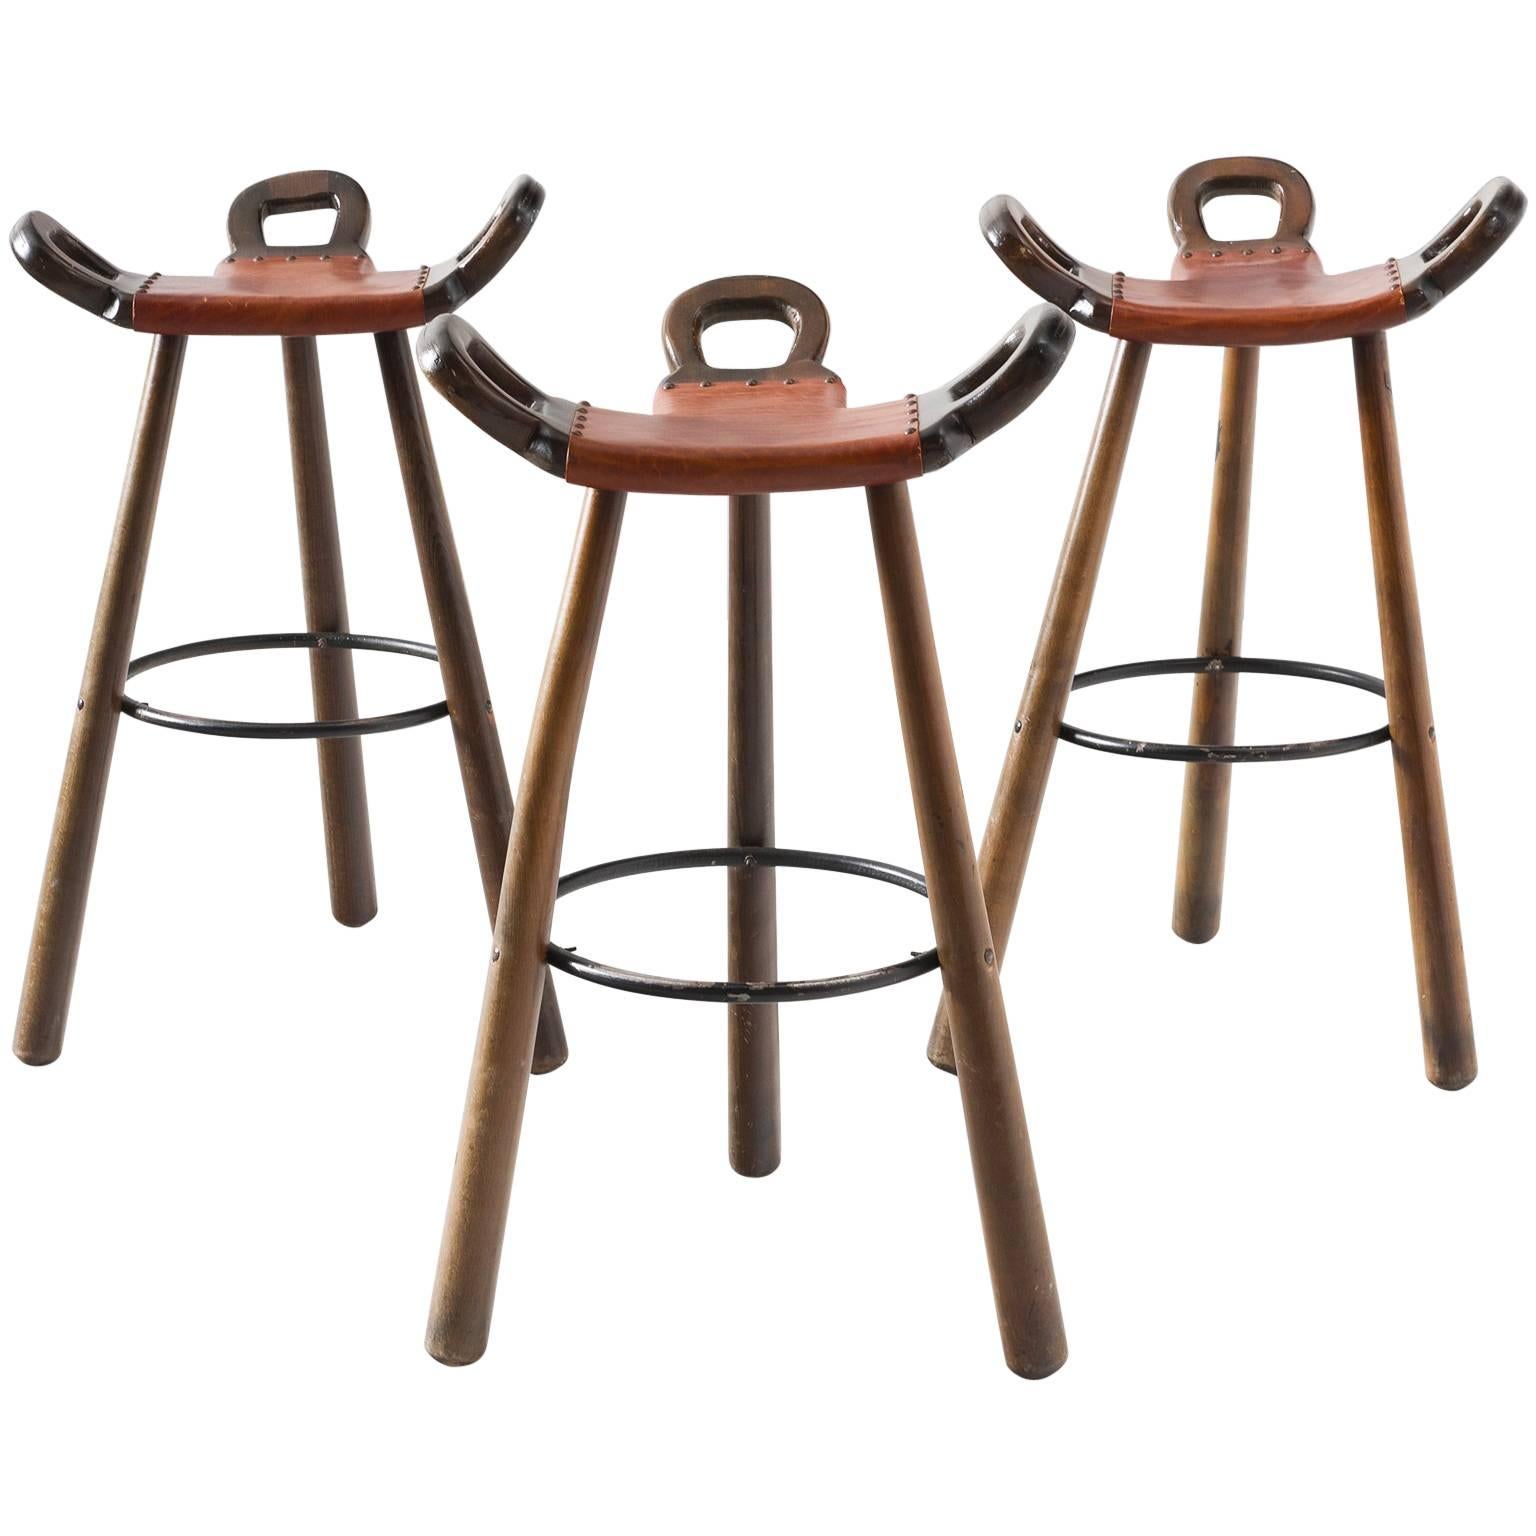 Set of Three 'Marbella' Brutalist Bar Stools with Leather Seating